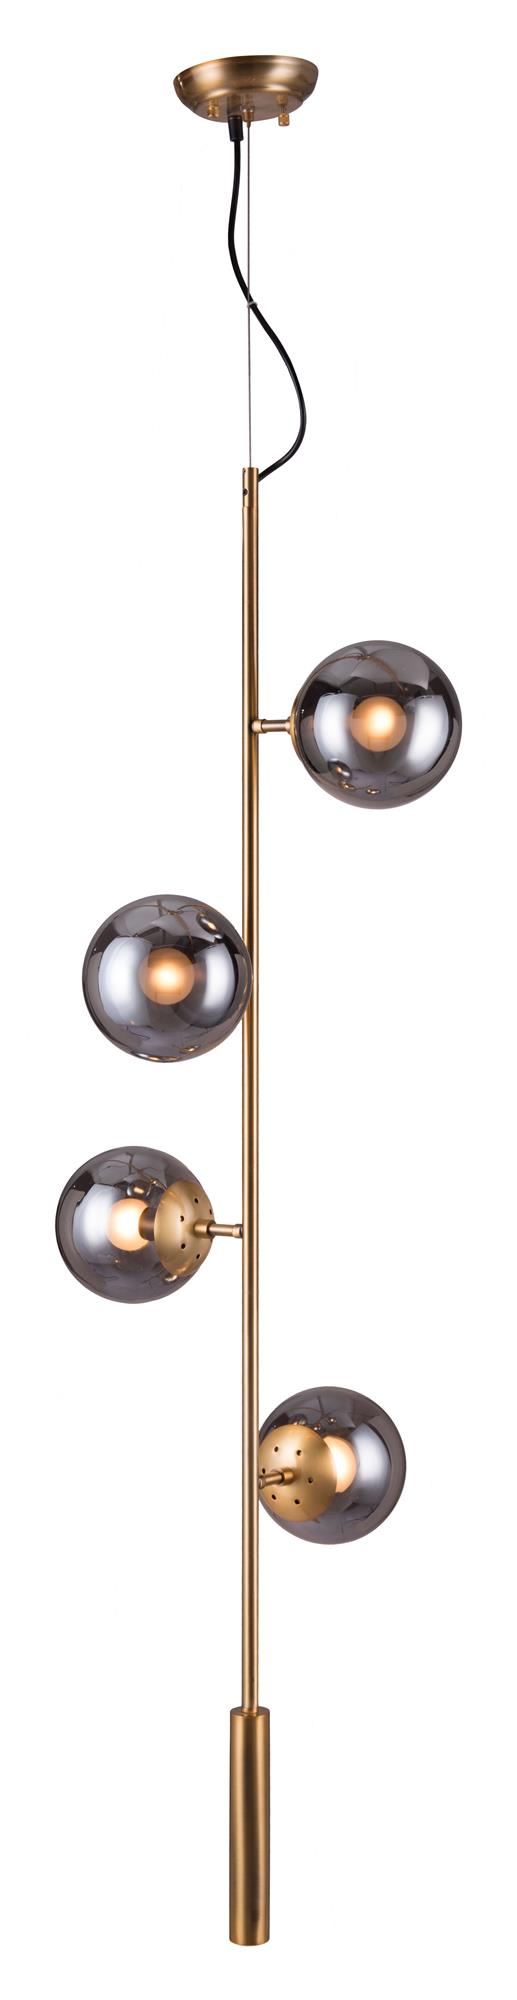 Zola-designed lamp suitable for varied ceiling heights -  N/A